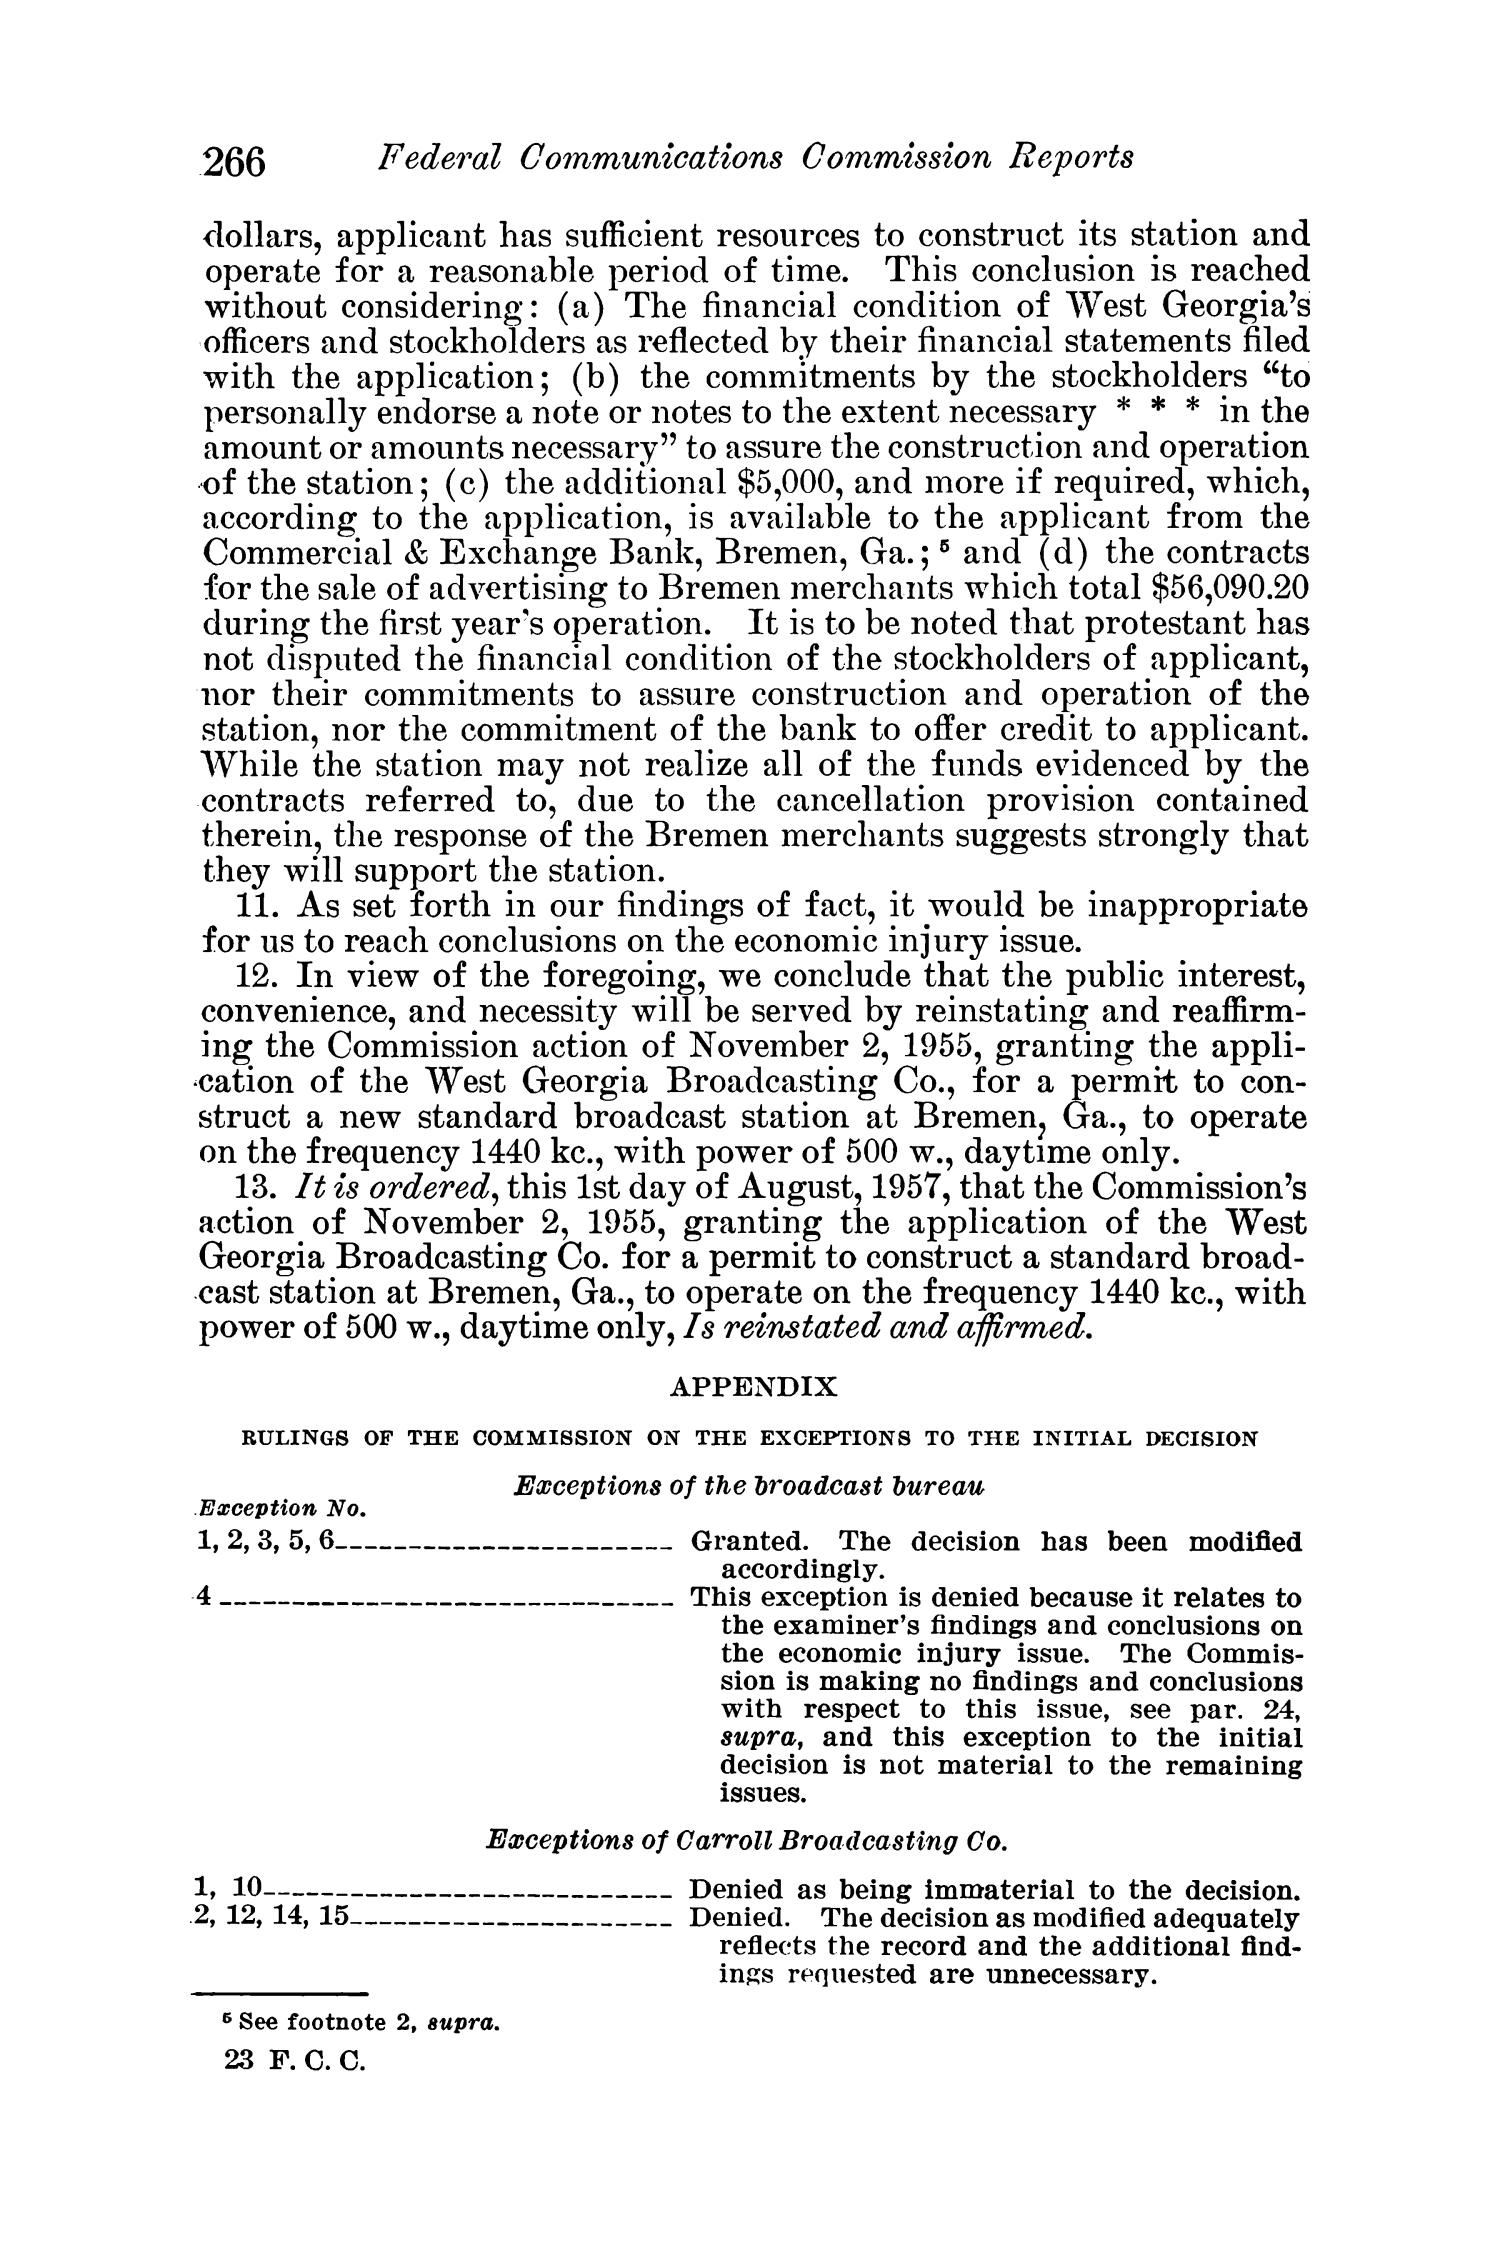 FCC Reports, Volume 23, July 12, 1957 to December 27, 1957
                                                
                                                    266
                                                